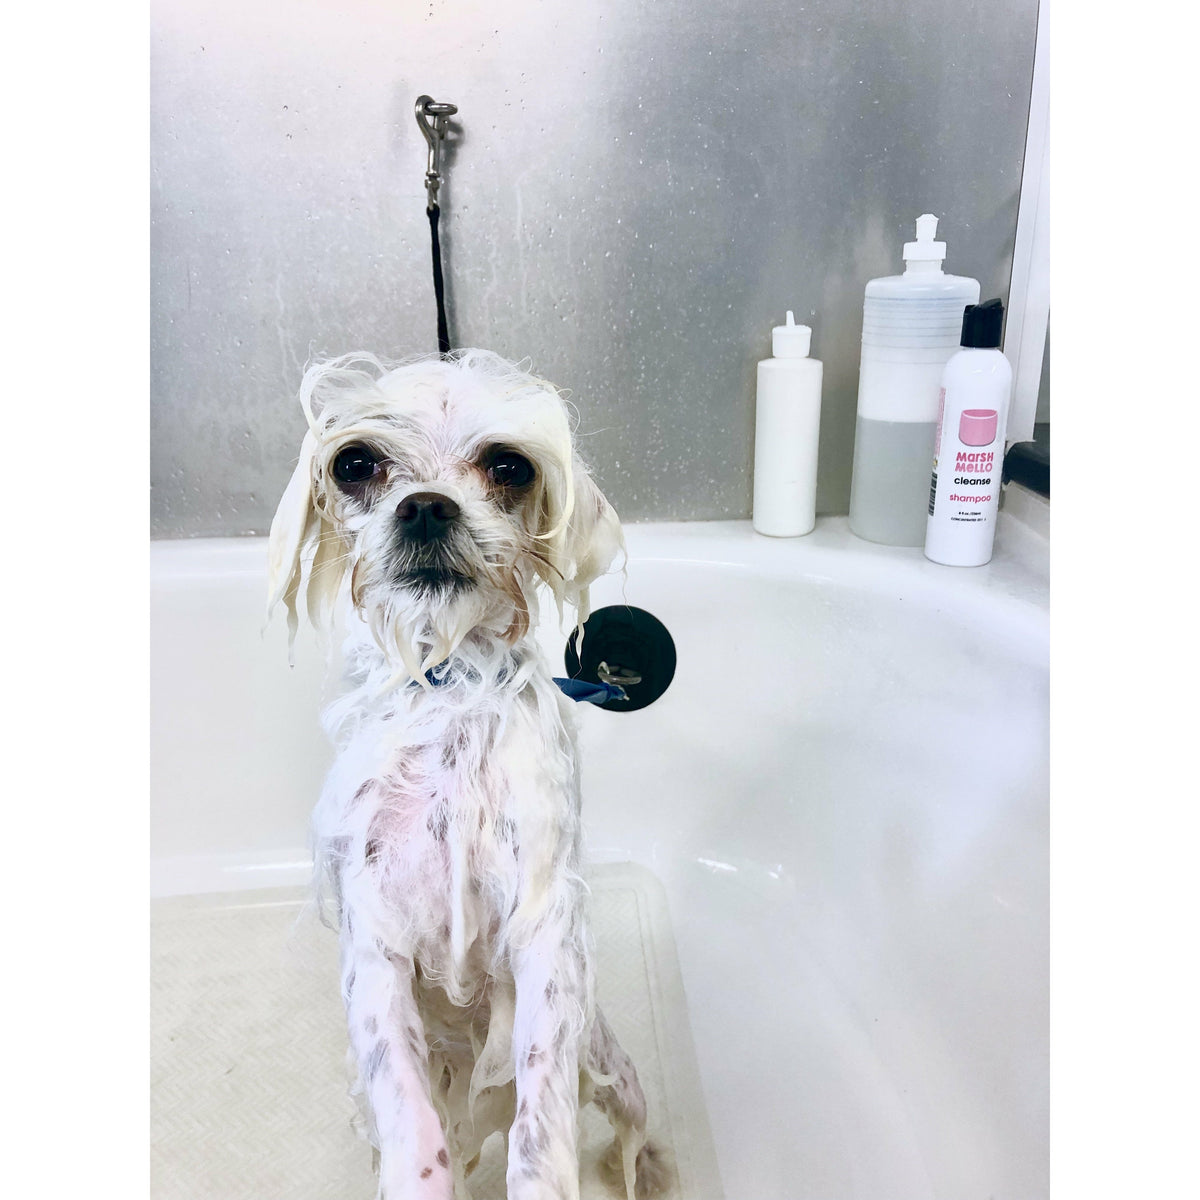 natural detangling spray, marshmello detangling spray, plant-based, silicone free, silicone-free, no silicones dematter detangler.  Conditioning detangling solution for dogs-natural plant extracts.